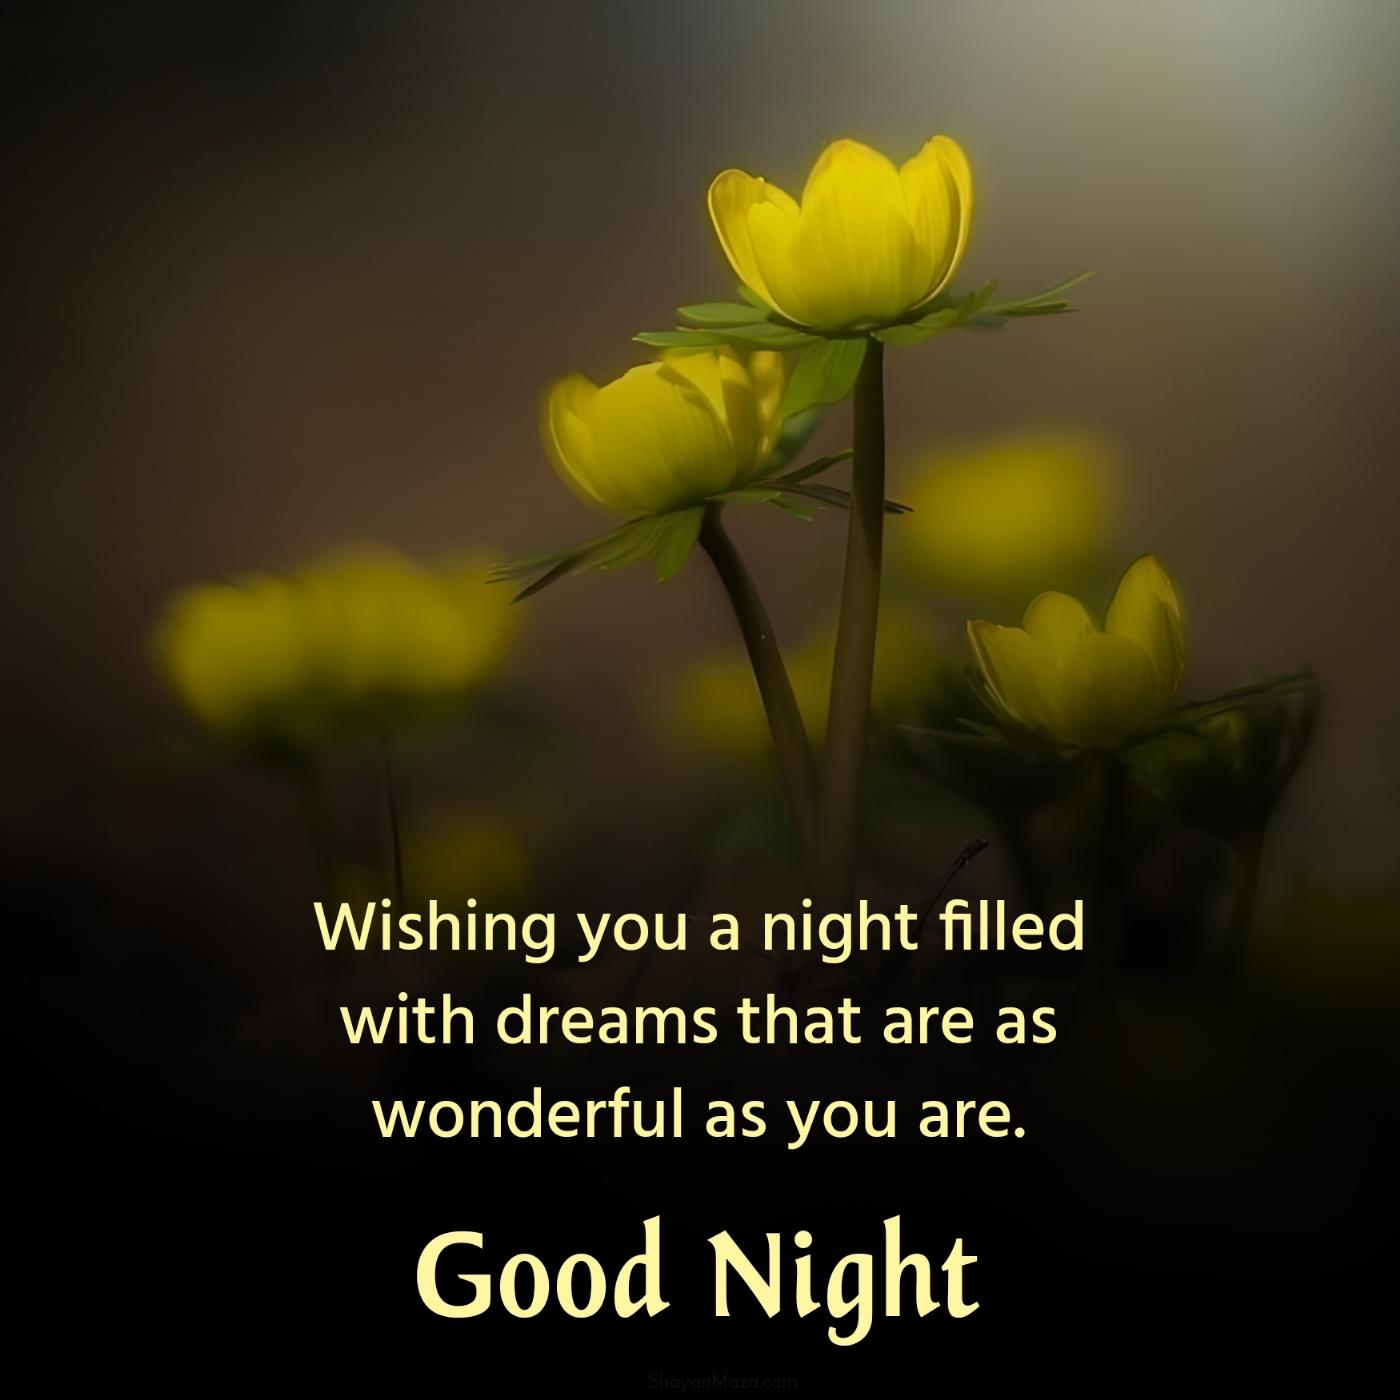 Wishing you a night filled with dreams that are as wonderful as you